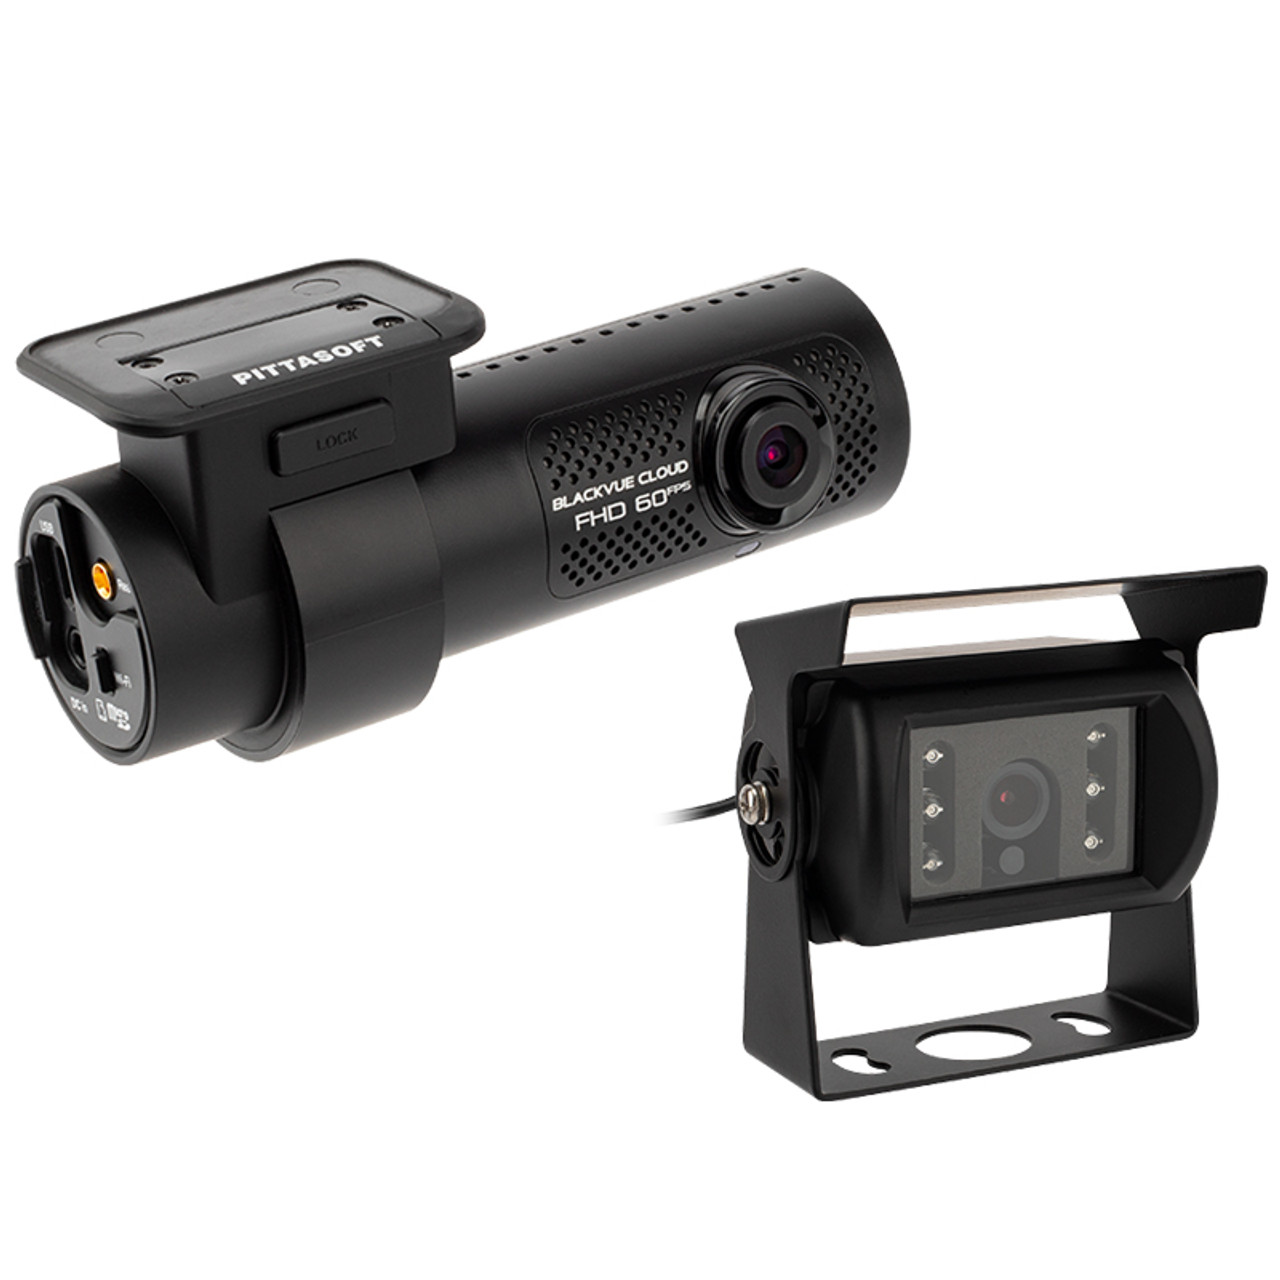 BlackVue DR770X-2CH-TRUCK Front and Wasterproof Rear Exterior 1080p Dash Cam